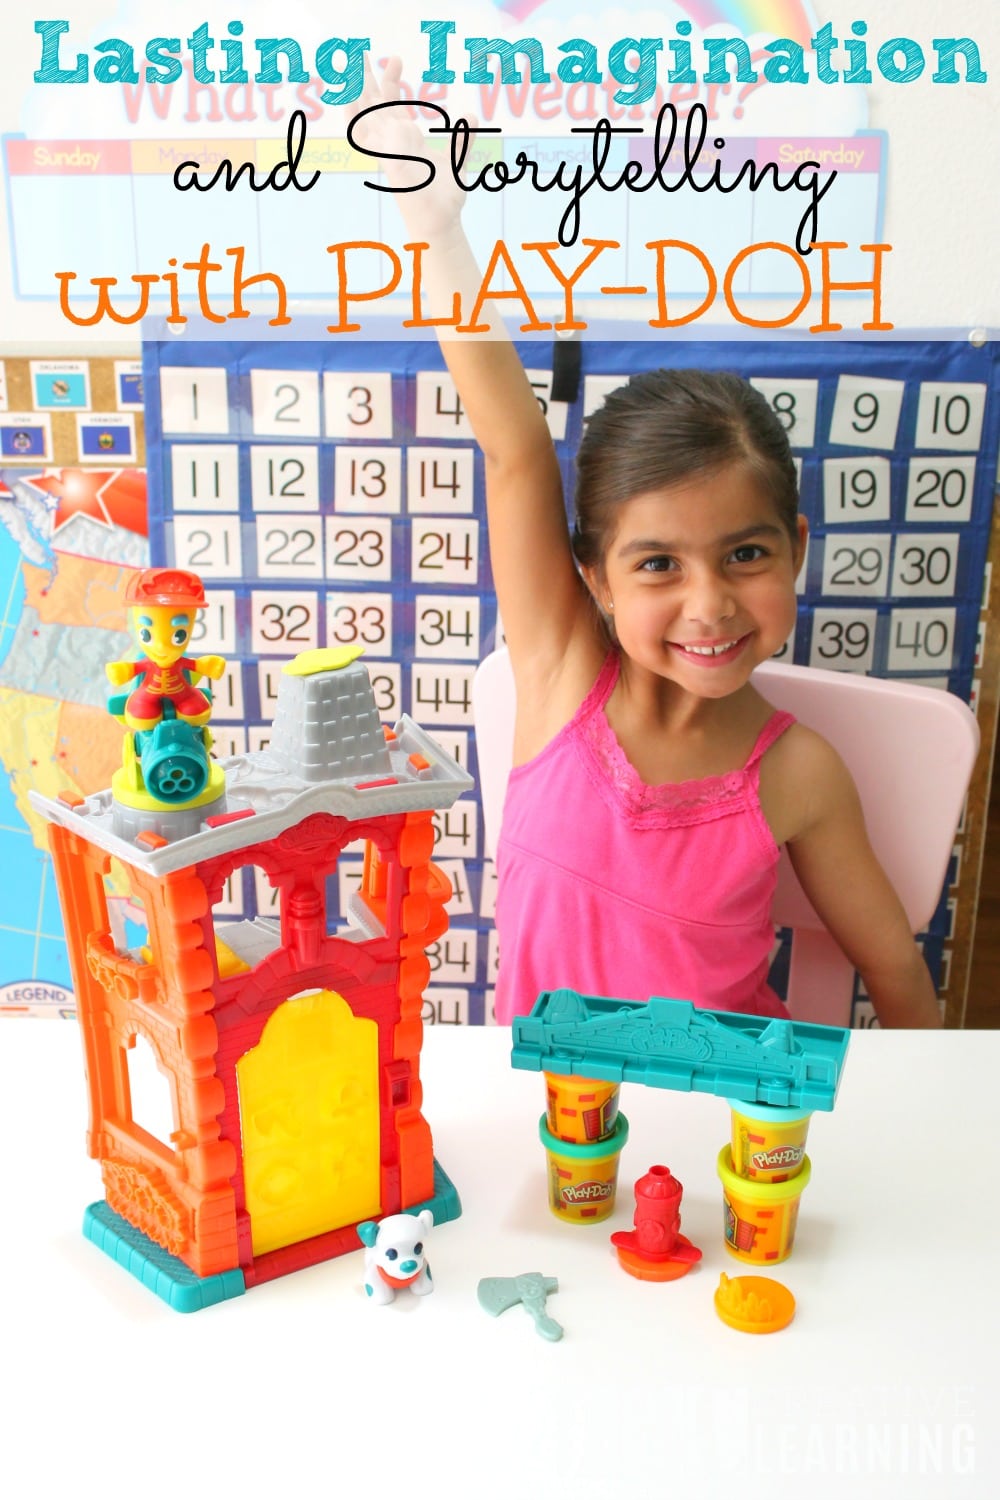 Lasting Imagination and Storytelling with Play Doh